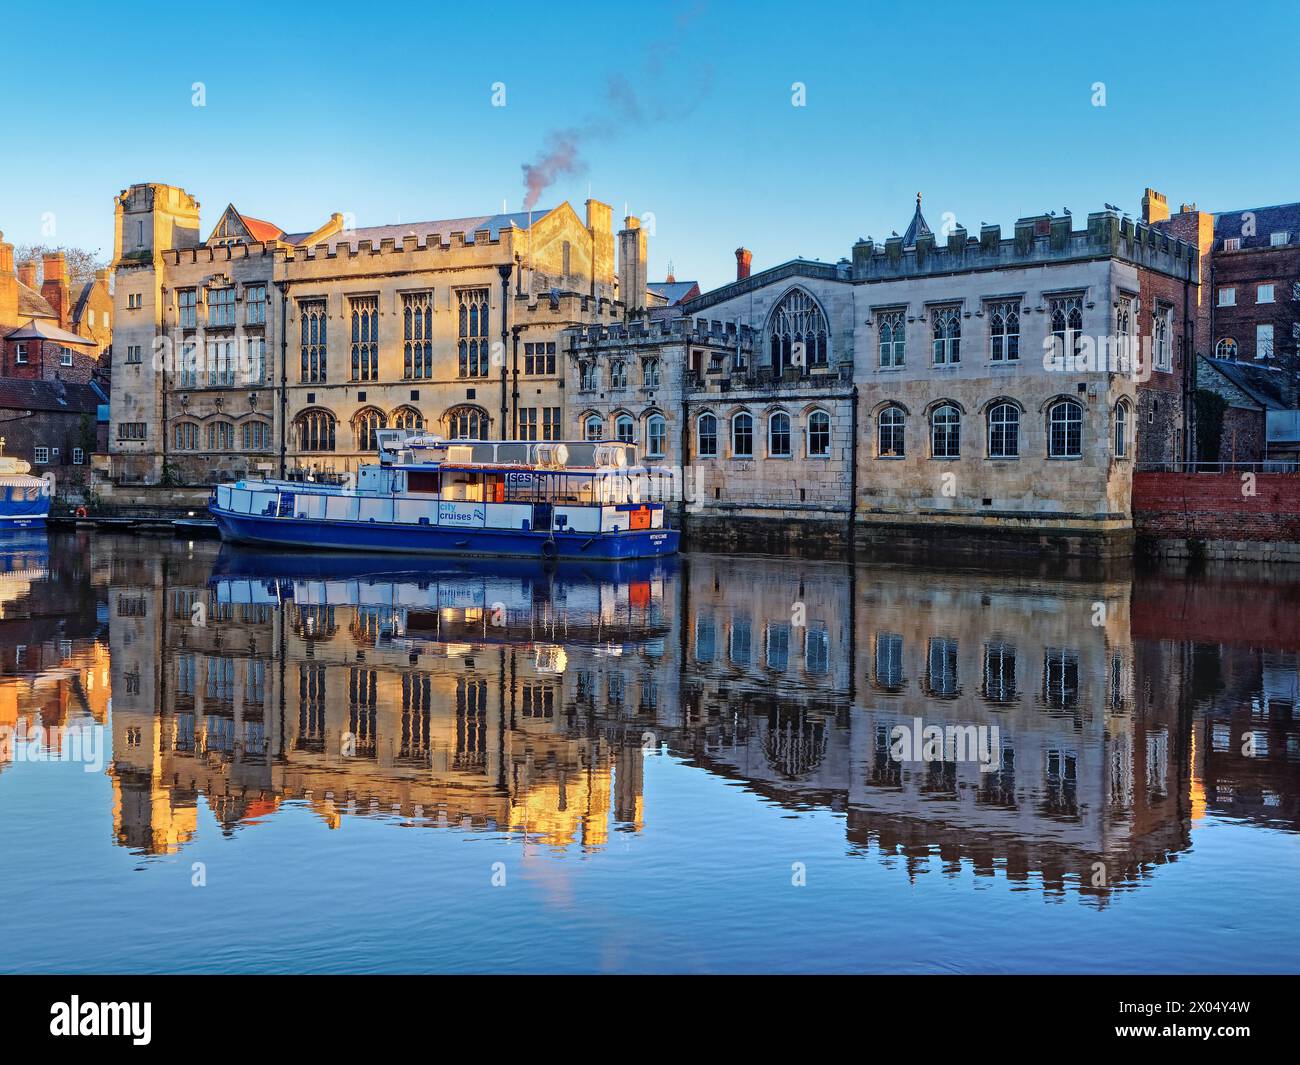 UK, North Yorkshire, York, York Guildhall on the banks of the River Ouse. Stock Photo